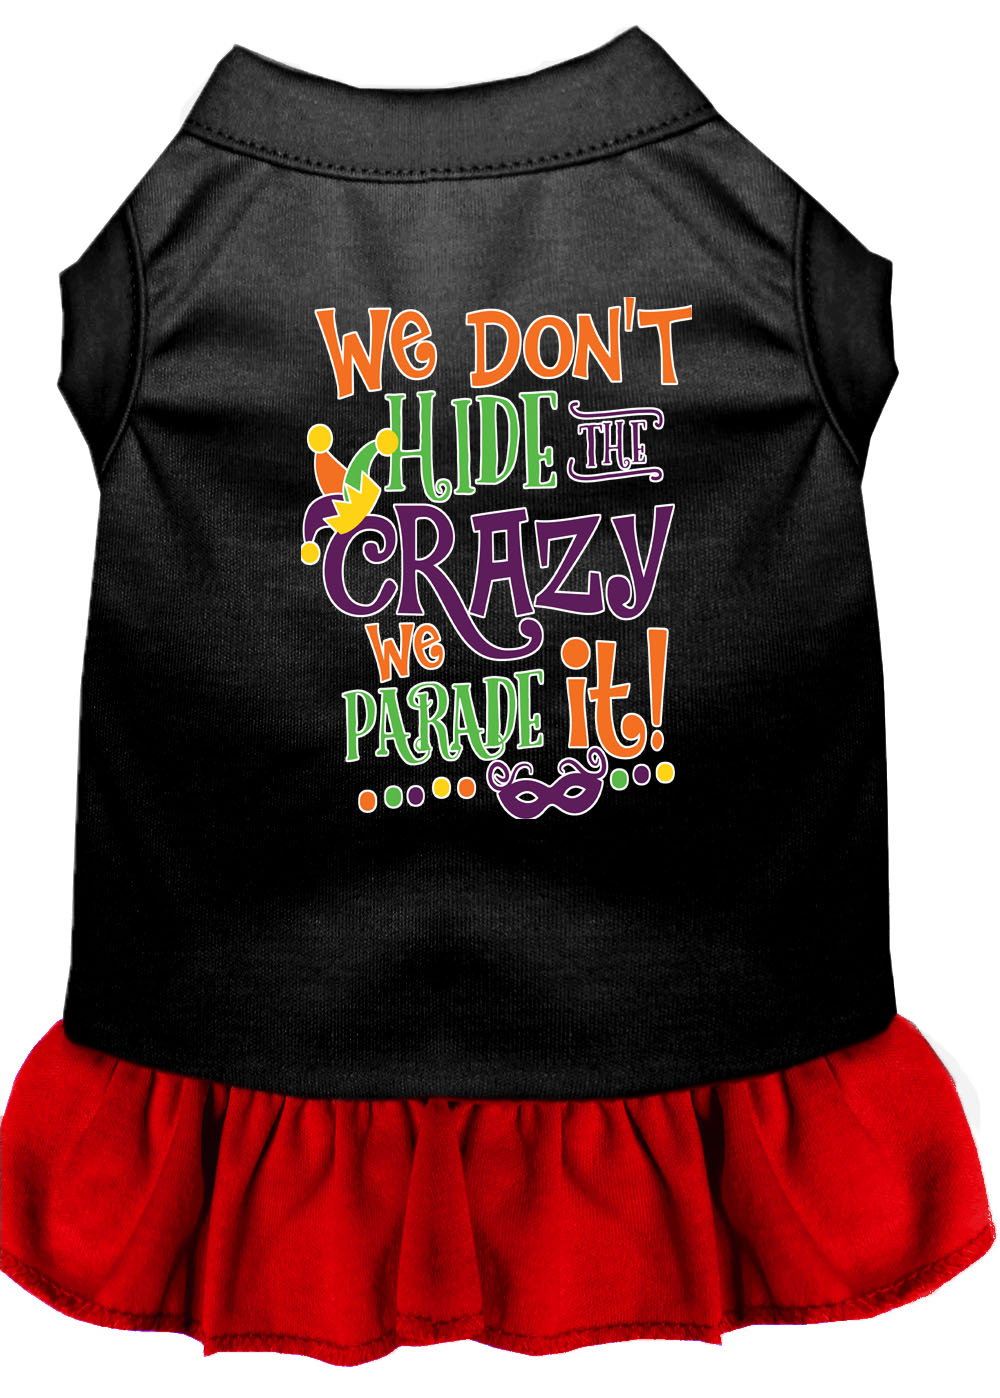 We Don't Hide the Crazy Screen Print Mardi Gras Dog Dress Black with Red Lg